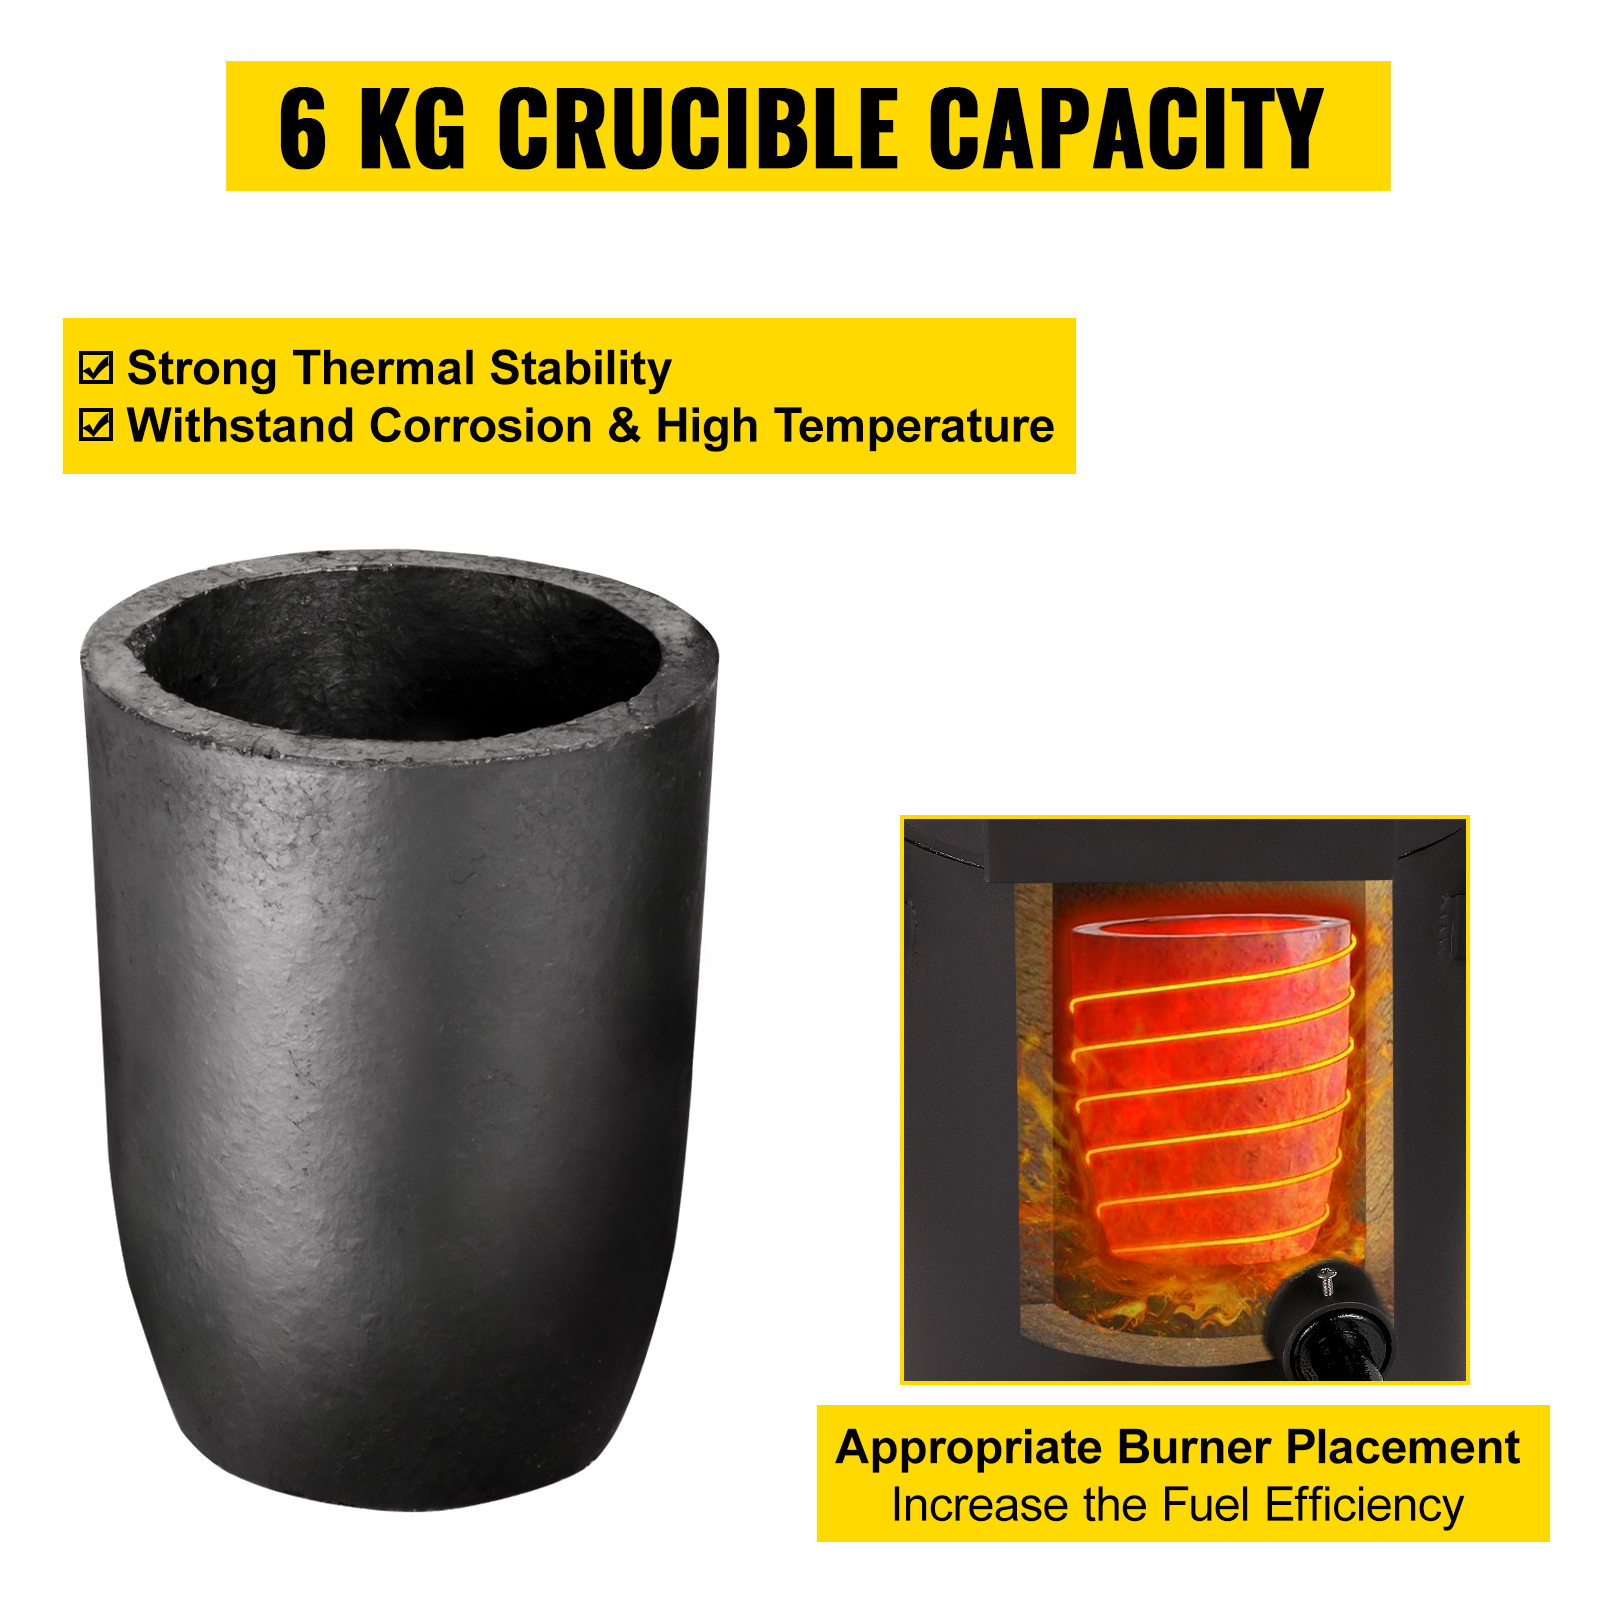 Crucible, Graphite Crucible, Metal Melting Kit Gold Melting Kit for Metals  for Jewelry